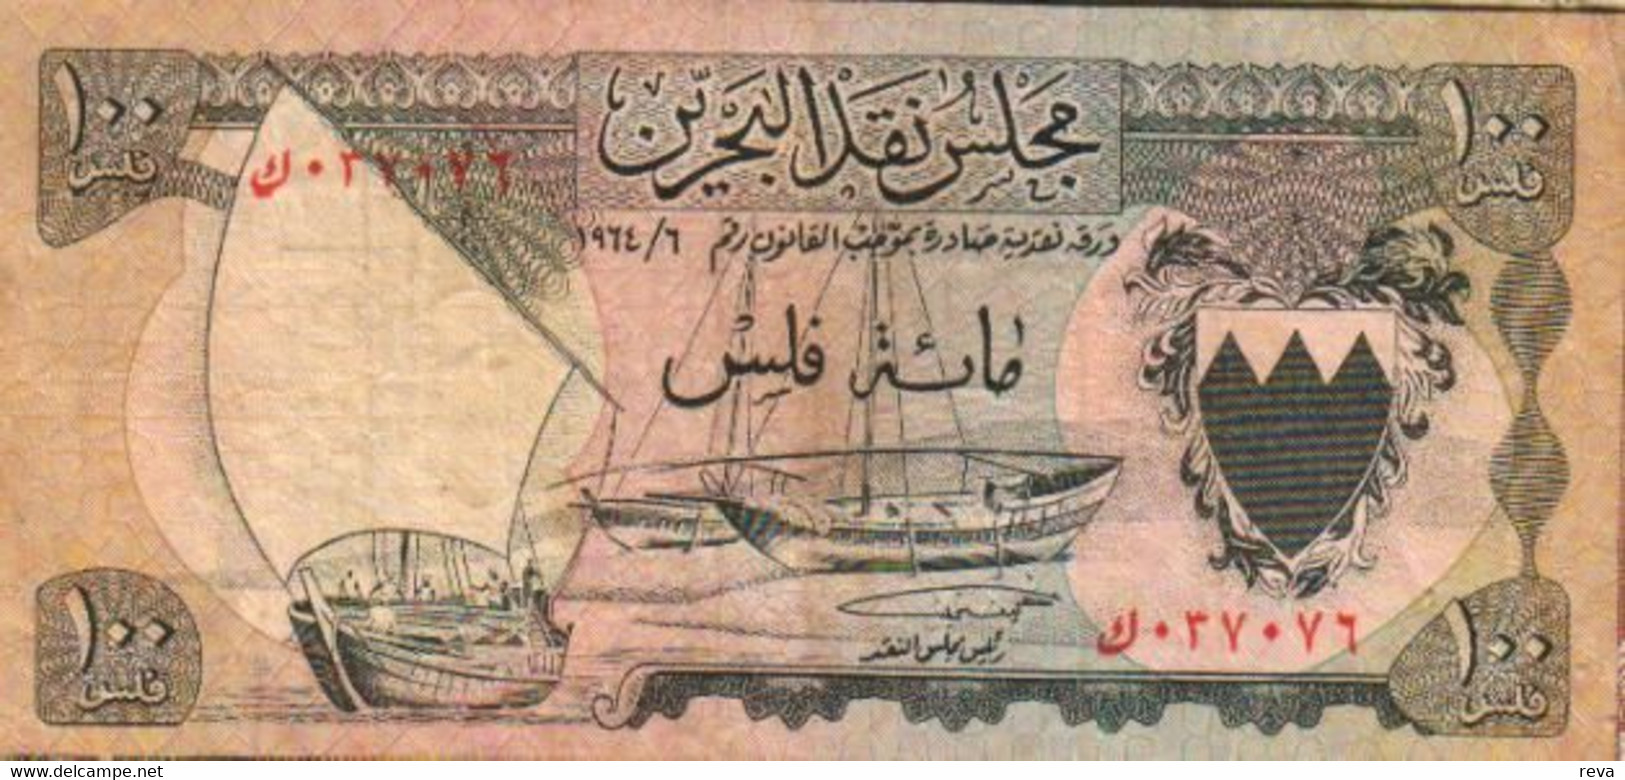 BAHRAIN 100 FILS  BOAT FRONT PALM TREE BACK DATED 1964 VF P.1a 1 YEAR TYPE READ DESCRIPTION CAREFULLY !!! - Bahrein